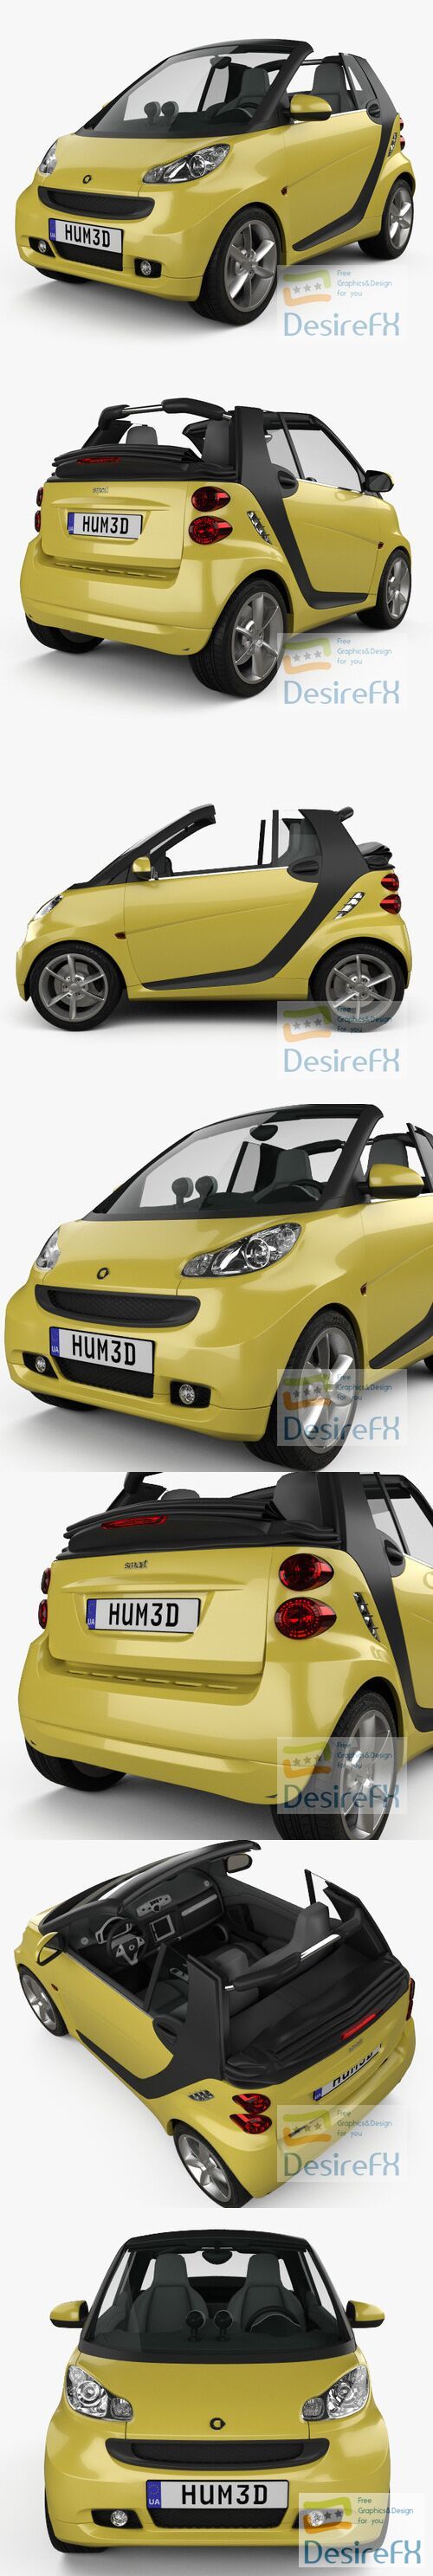 Smart Fortwo 2011 Convertible Open Top 3D Model